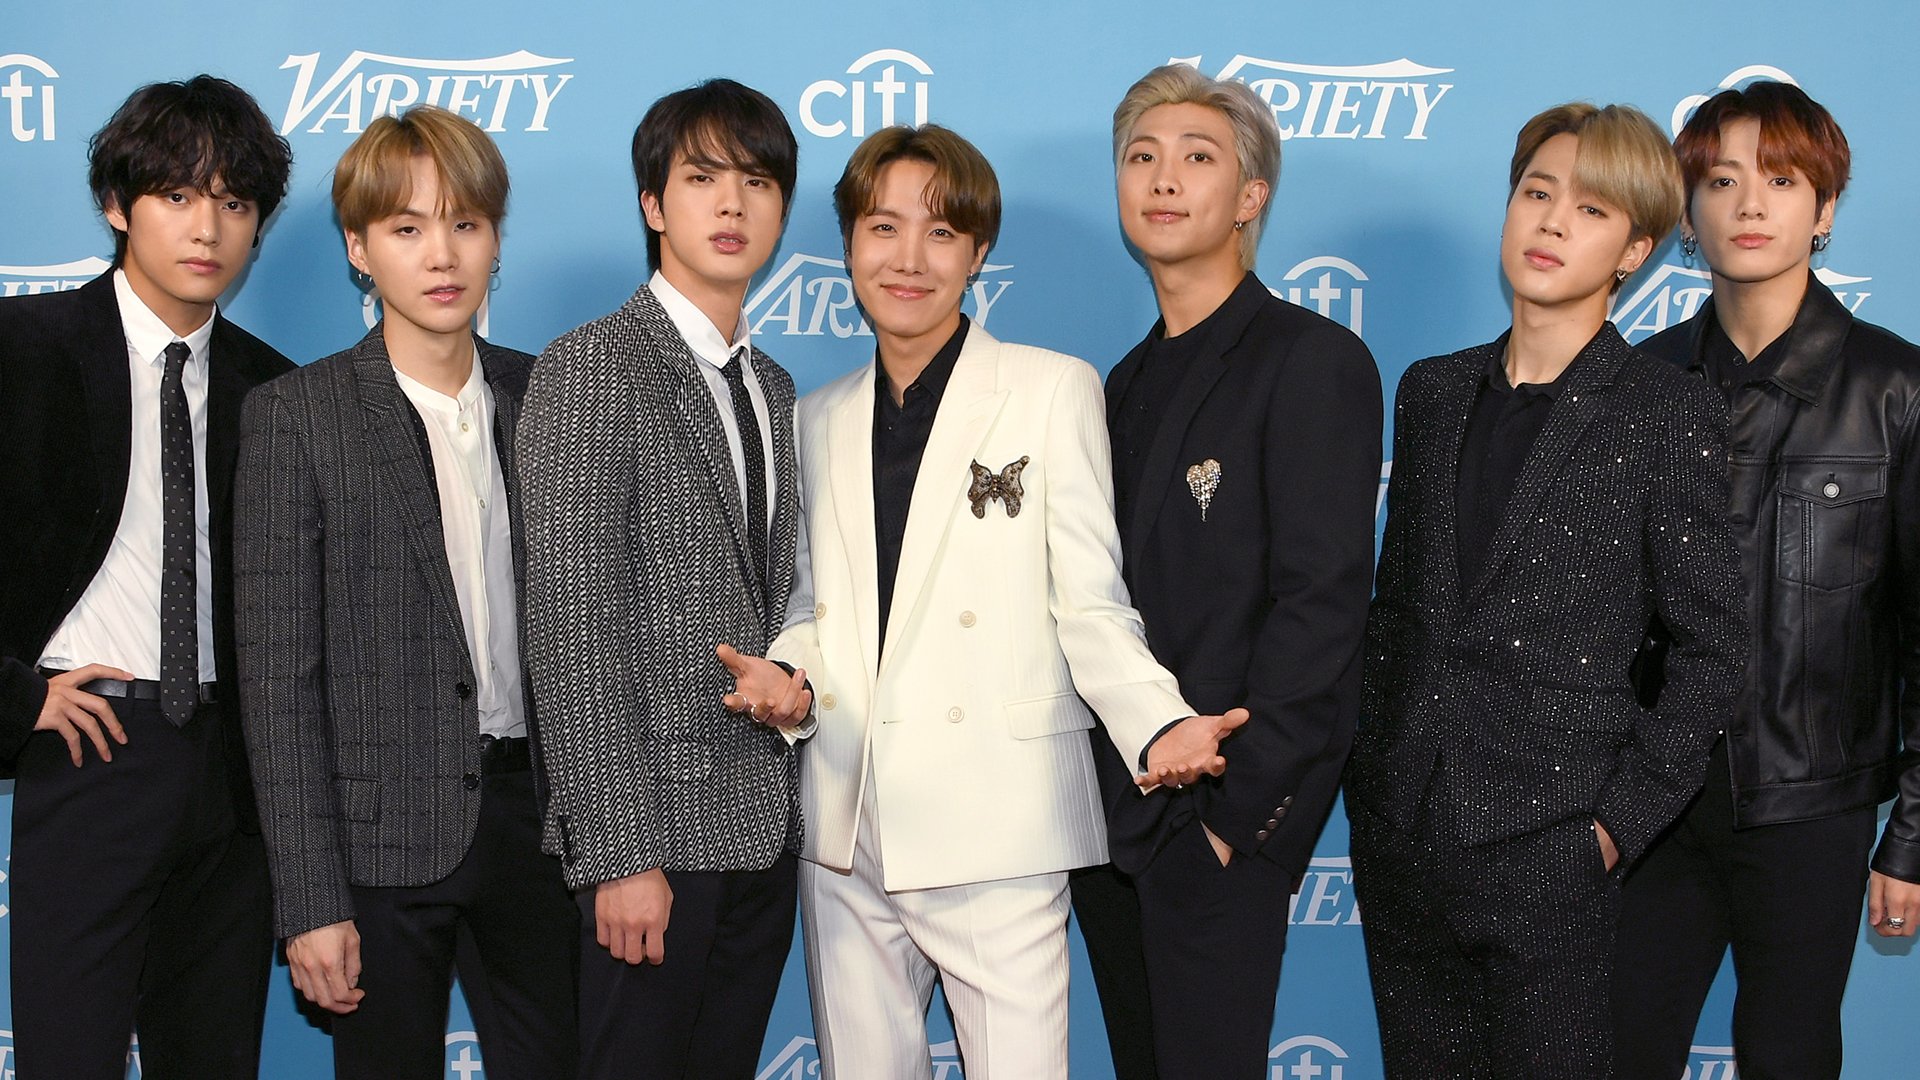 This BTS Member is the No. 1 K-Pop Star According to Fans